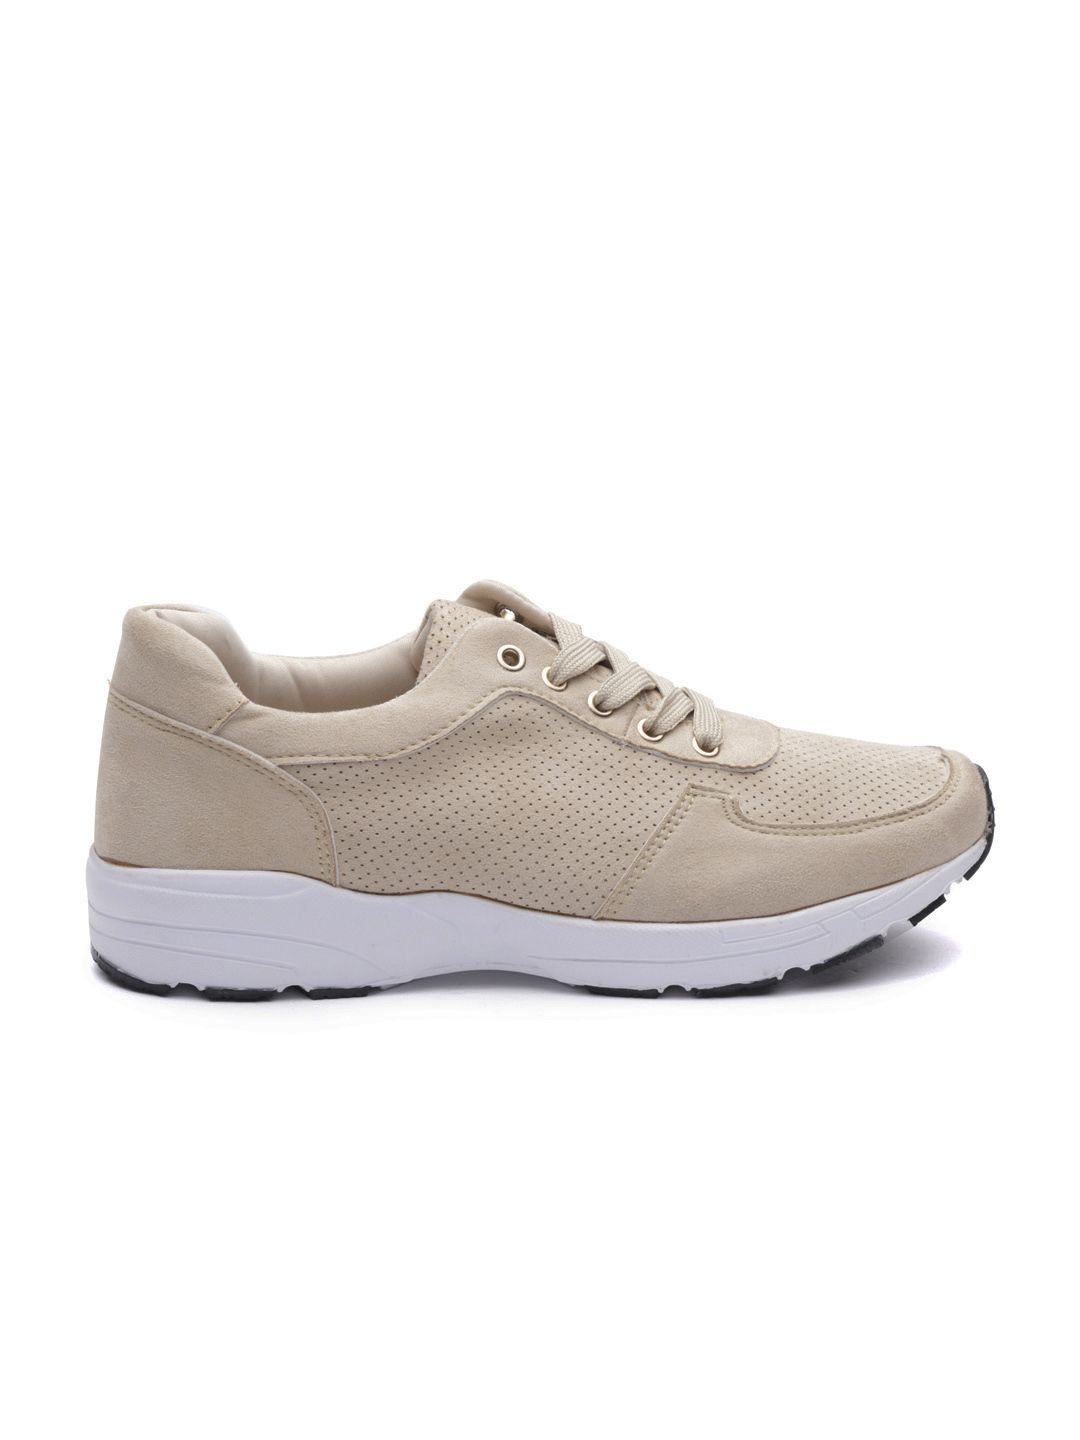 ether Women Beige Perforated Sneakers Price in India